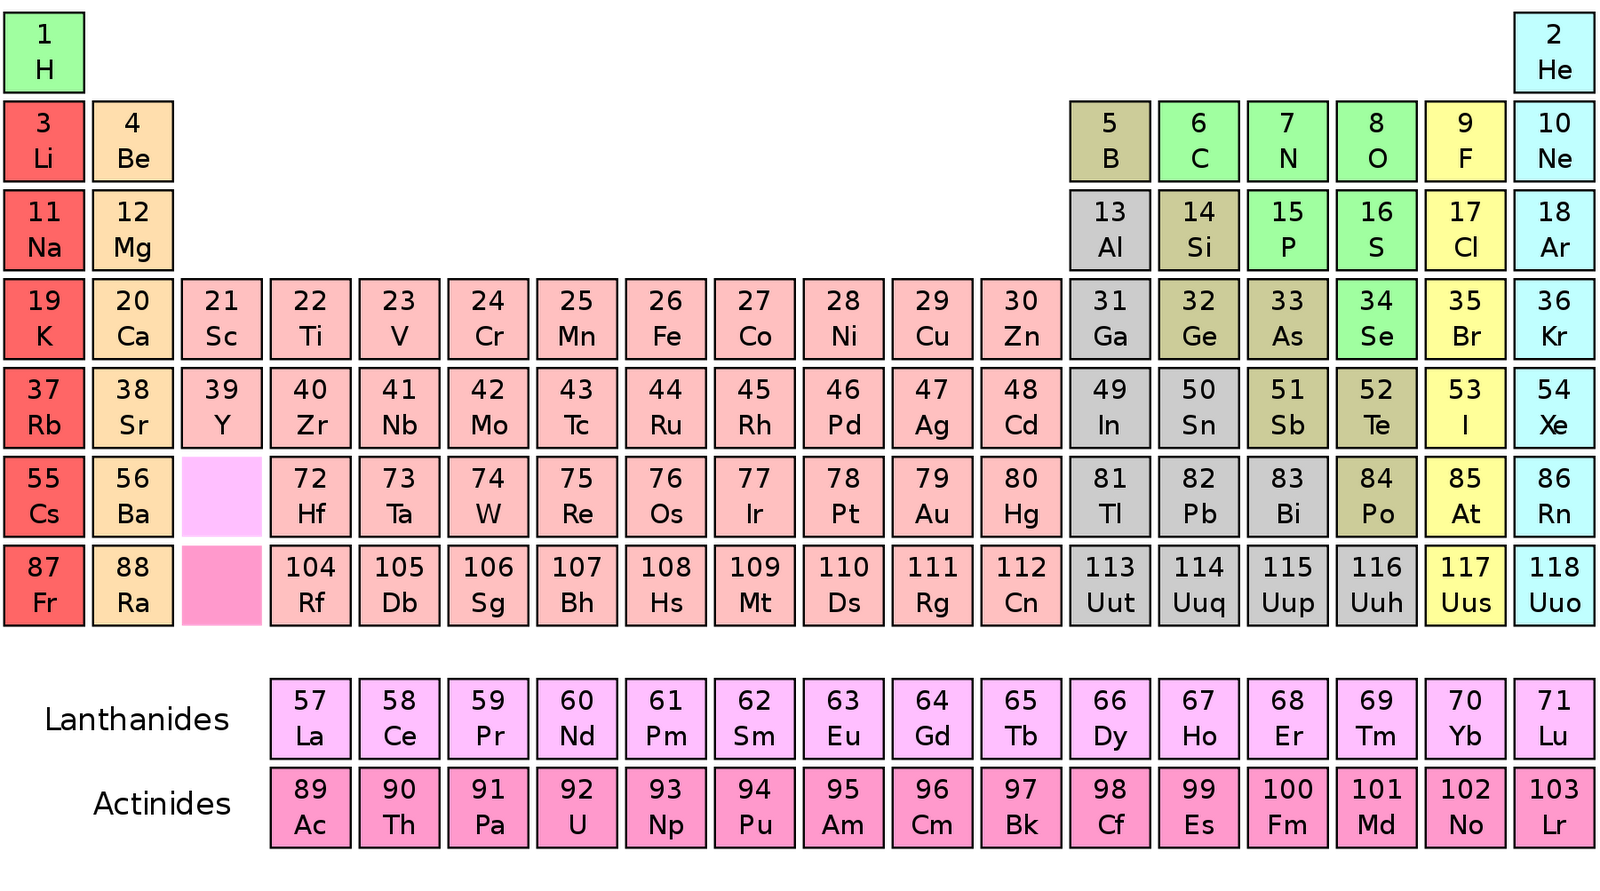 Periodic table with mass - displora